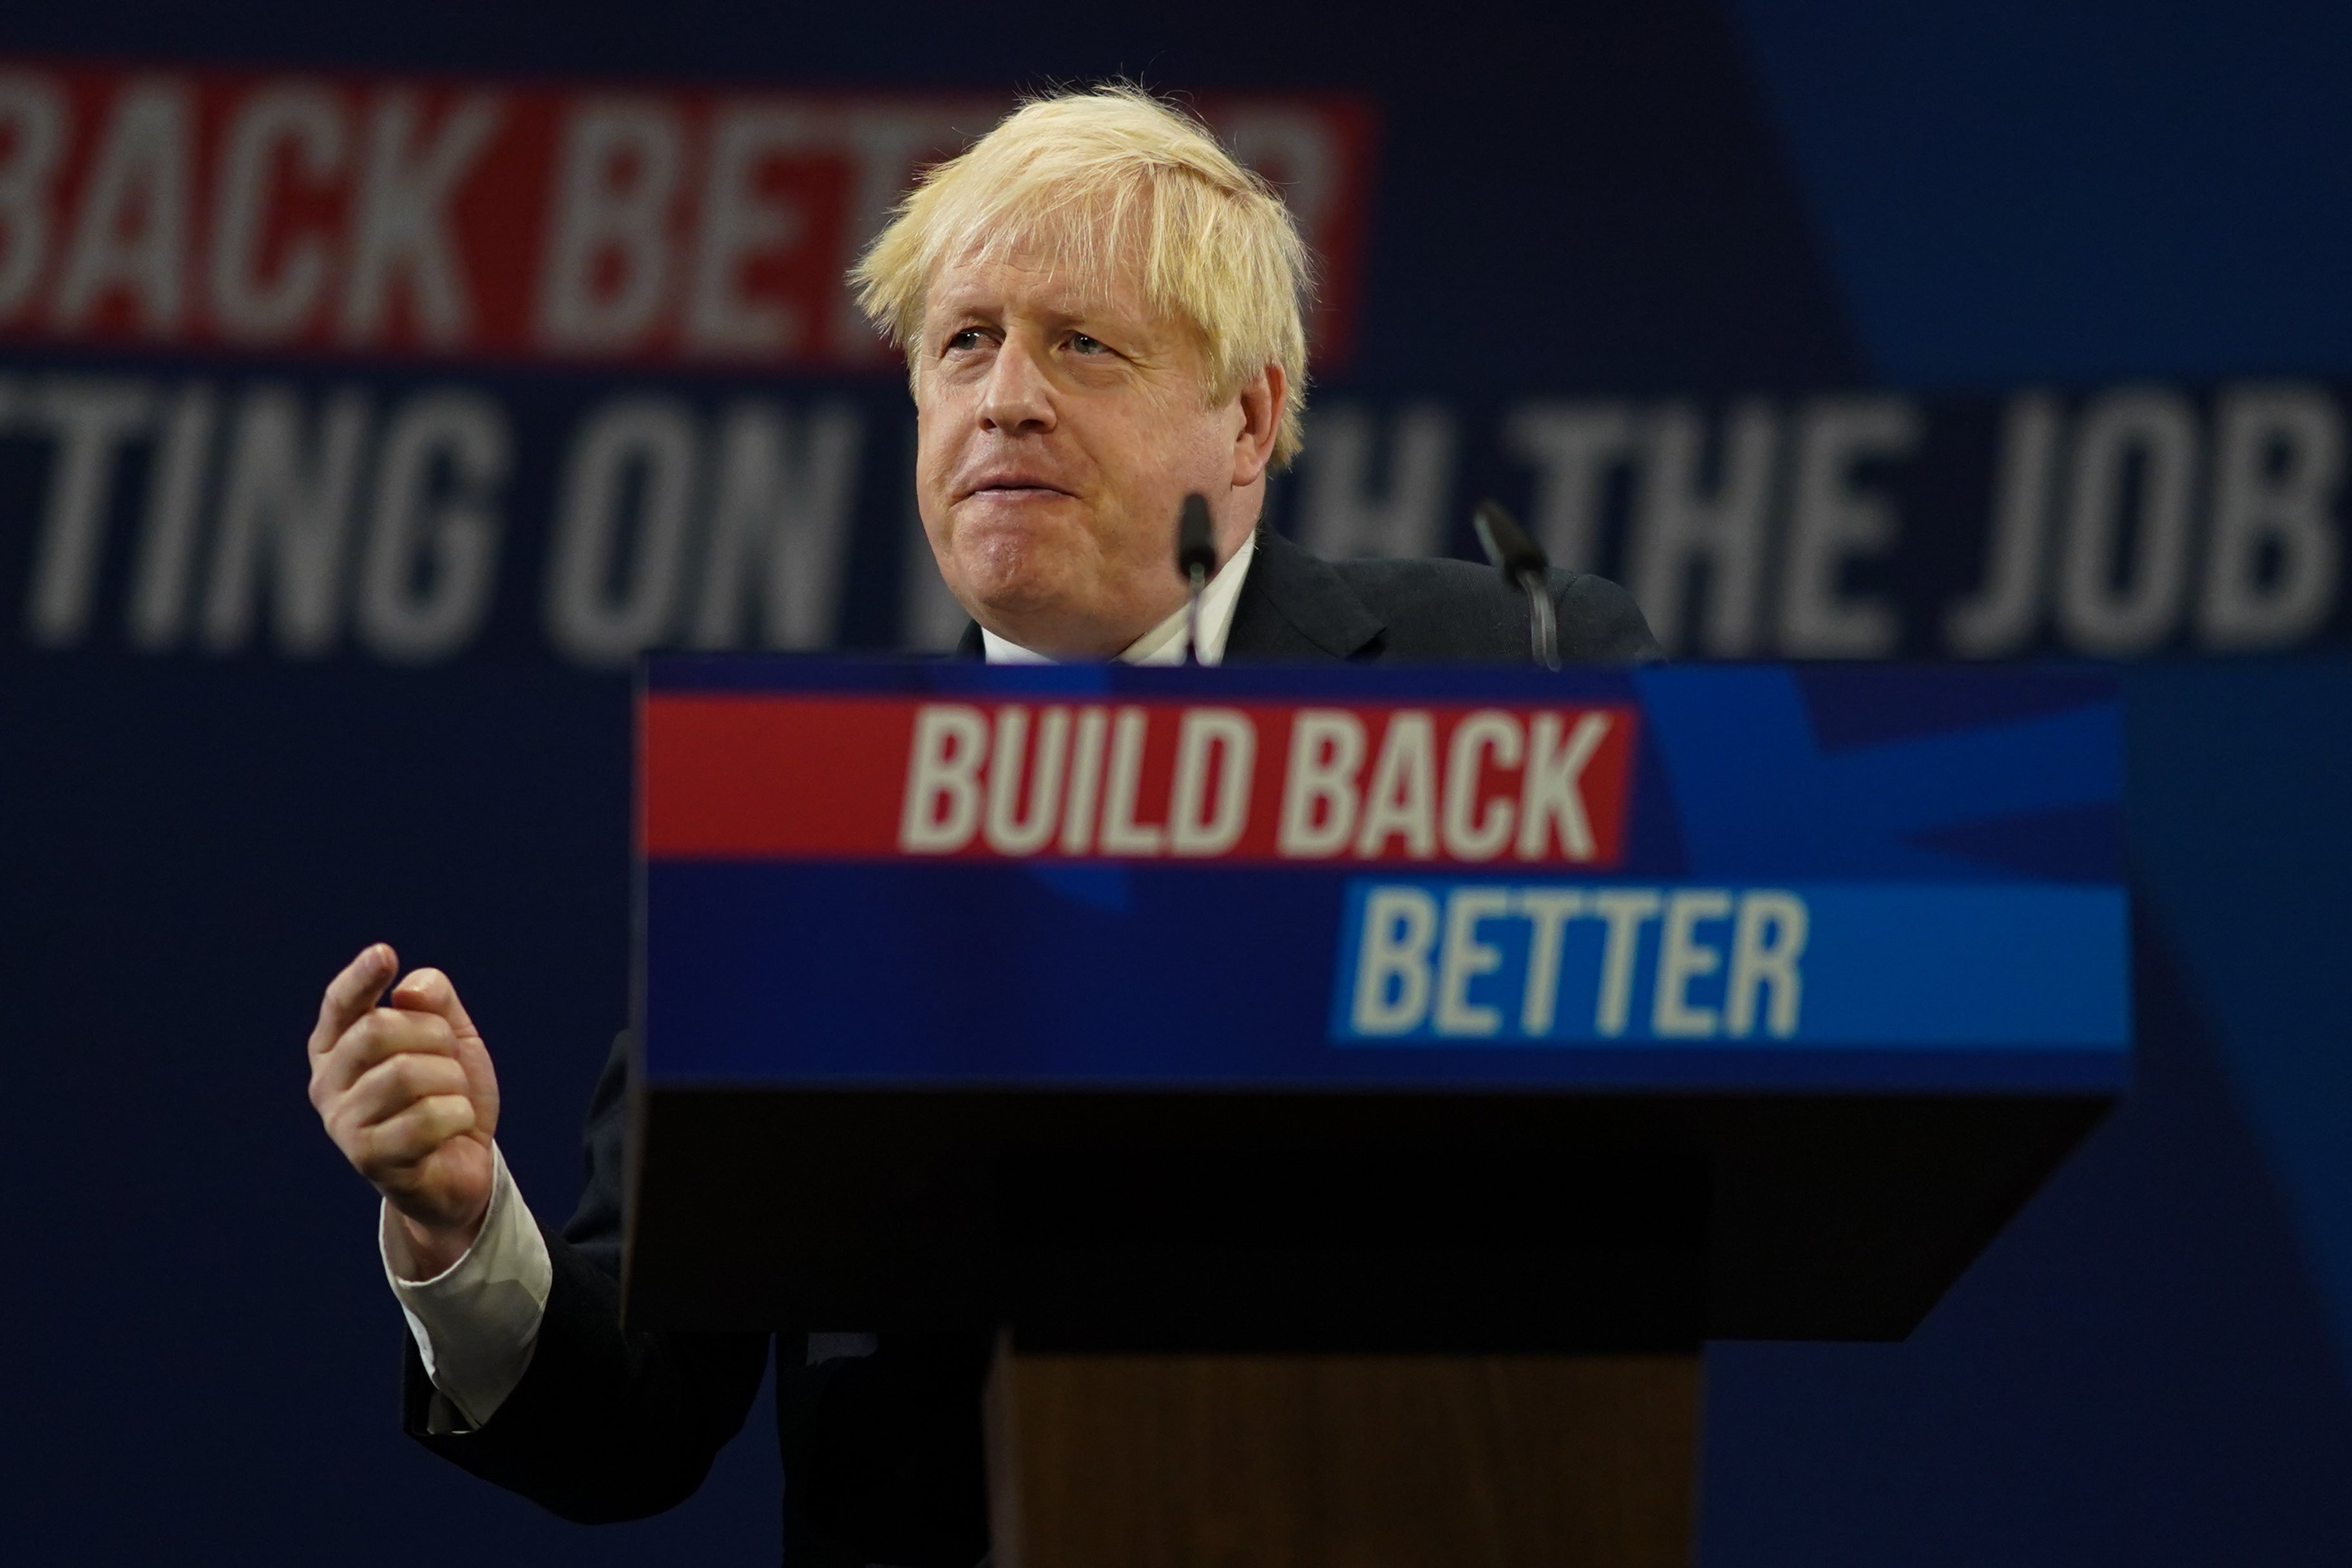 Boris Johnson delivers his keynote speech at the Tory Party conference